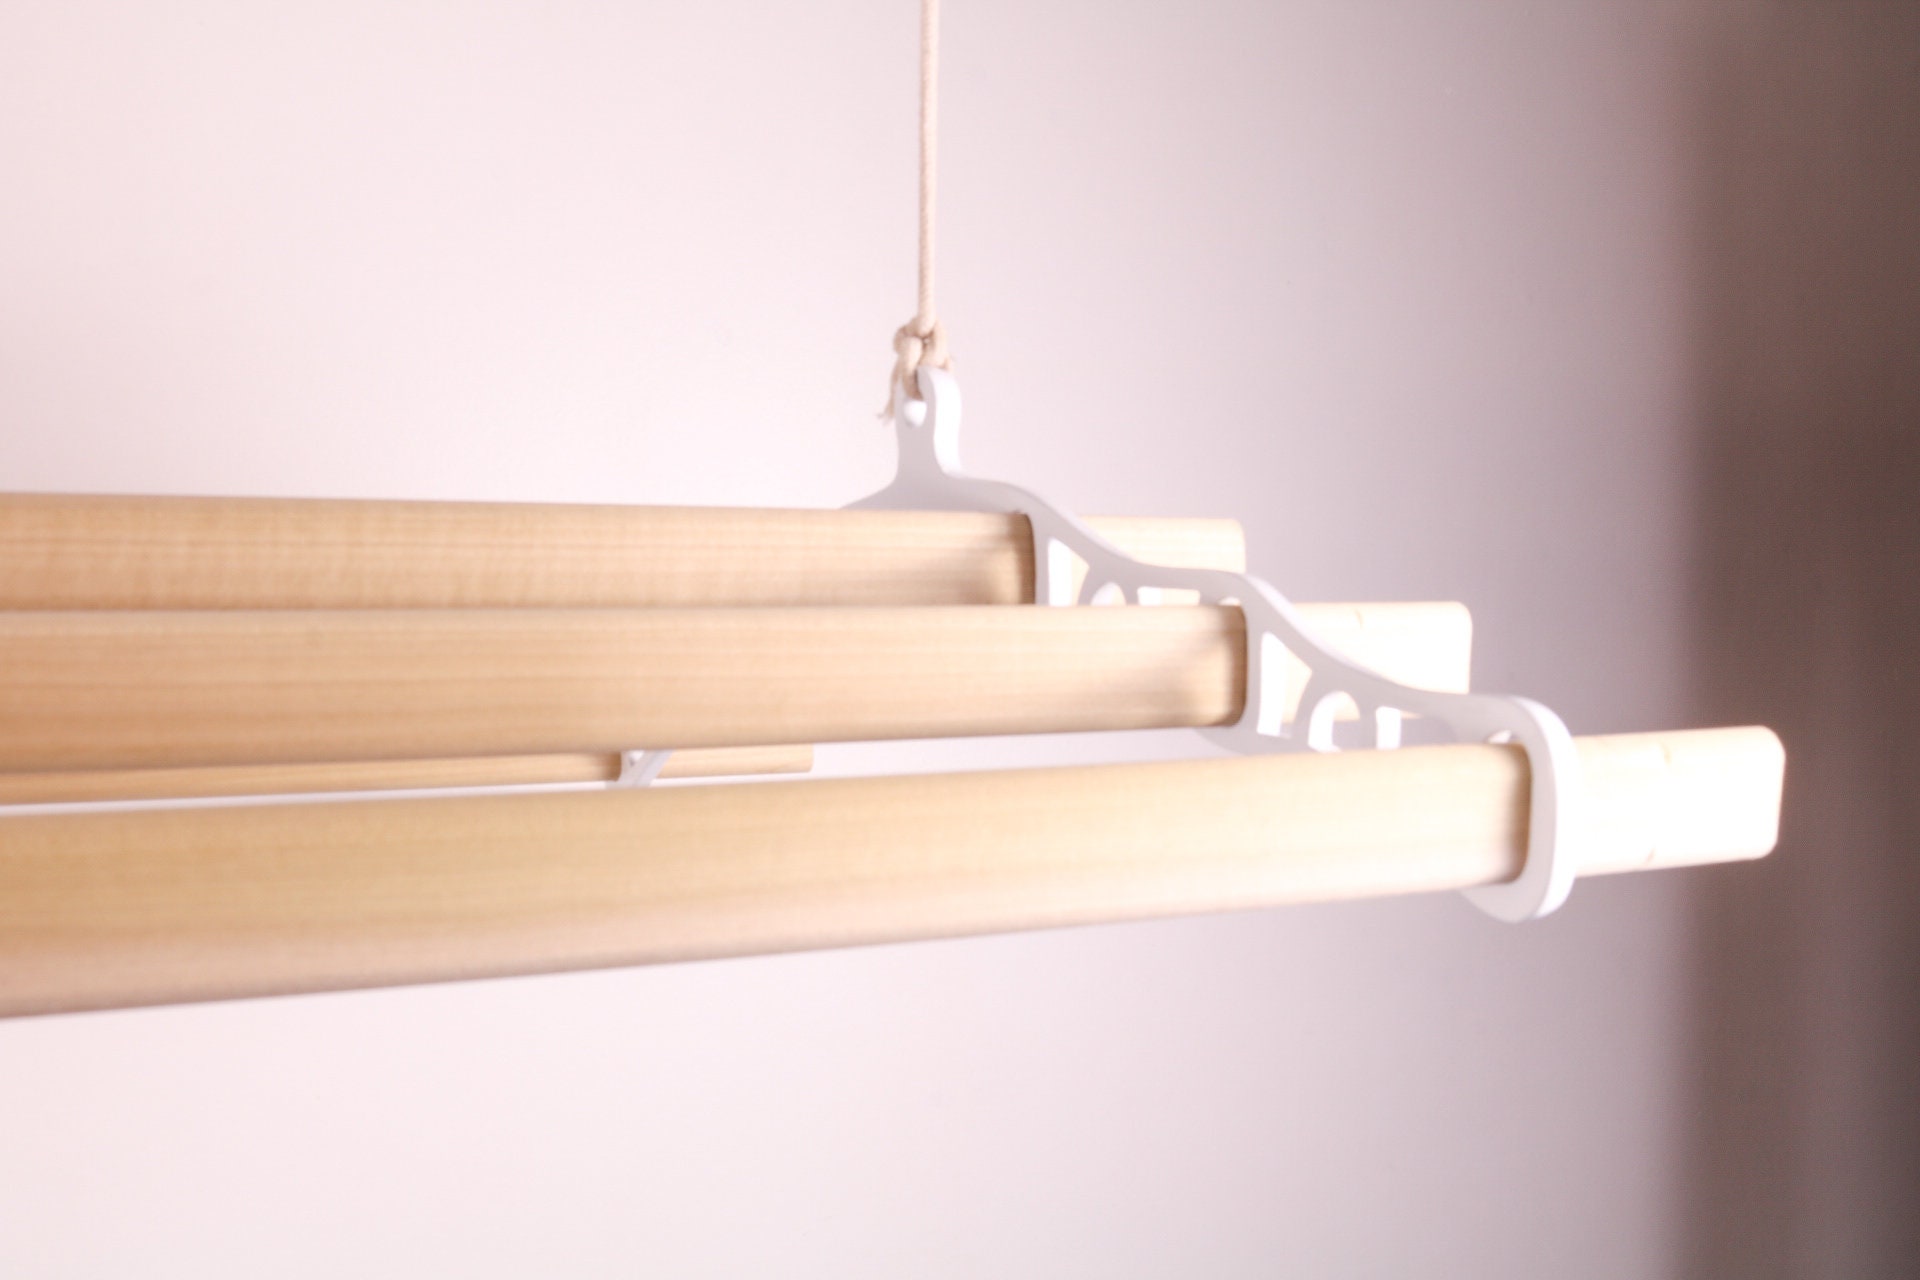 Wooden Foldable Clothes Airer, Clothes Drying Rack. Puidust  Pesukuivatusrest. 